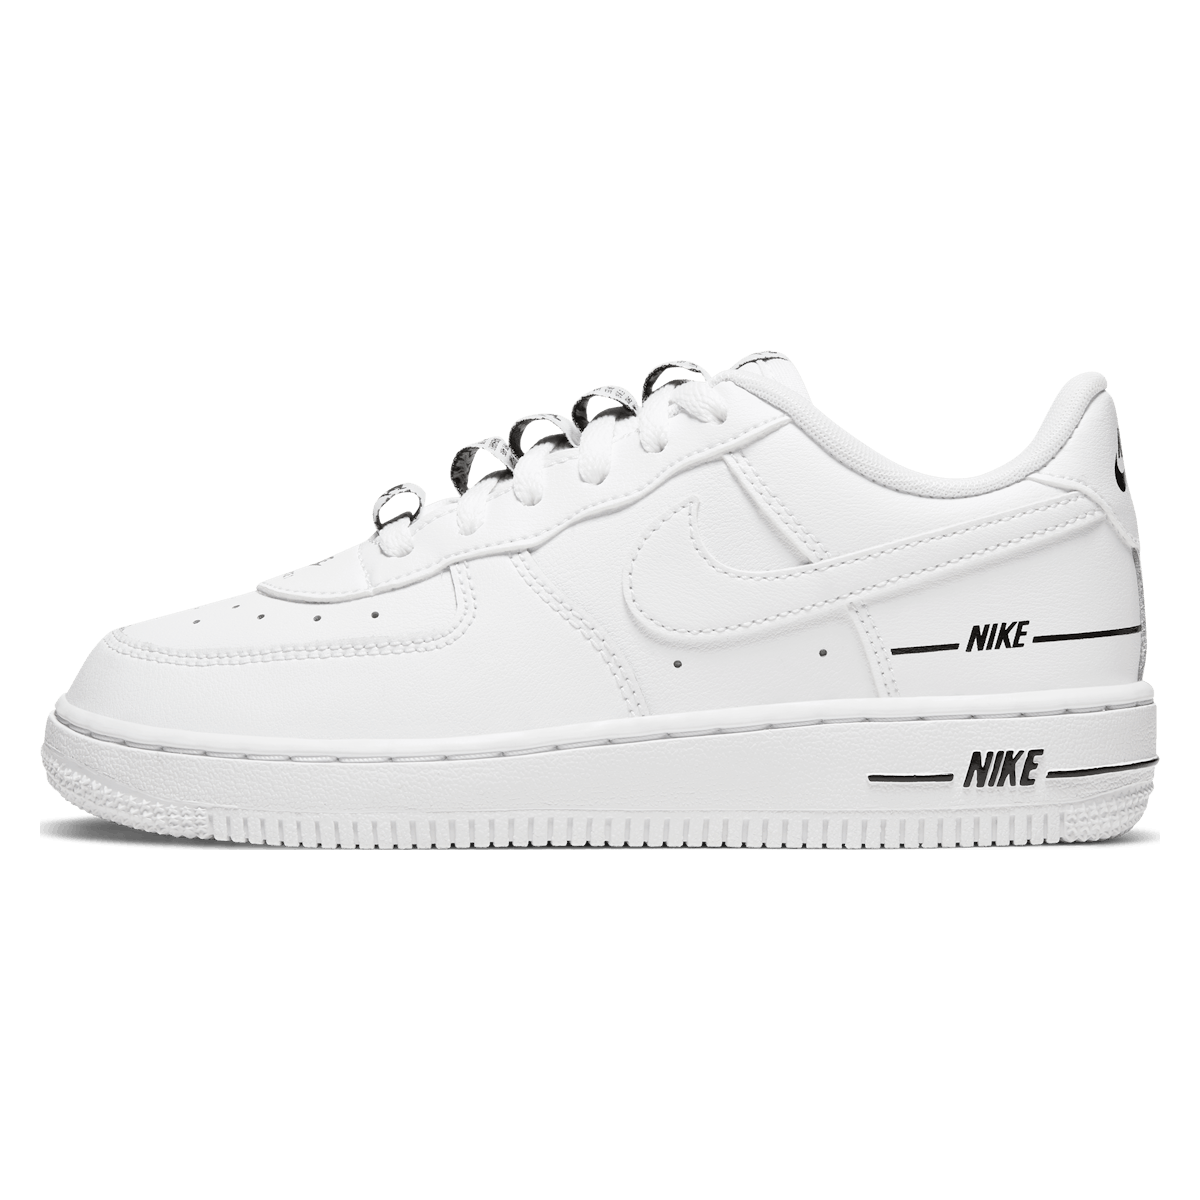 Nike Force 1 LV8 3 PS